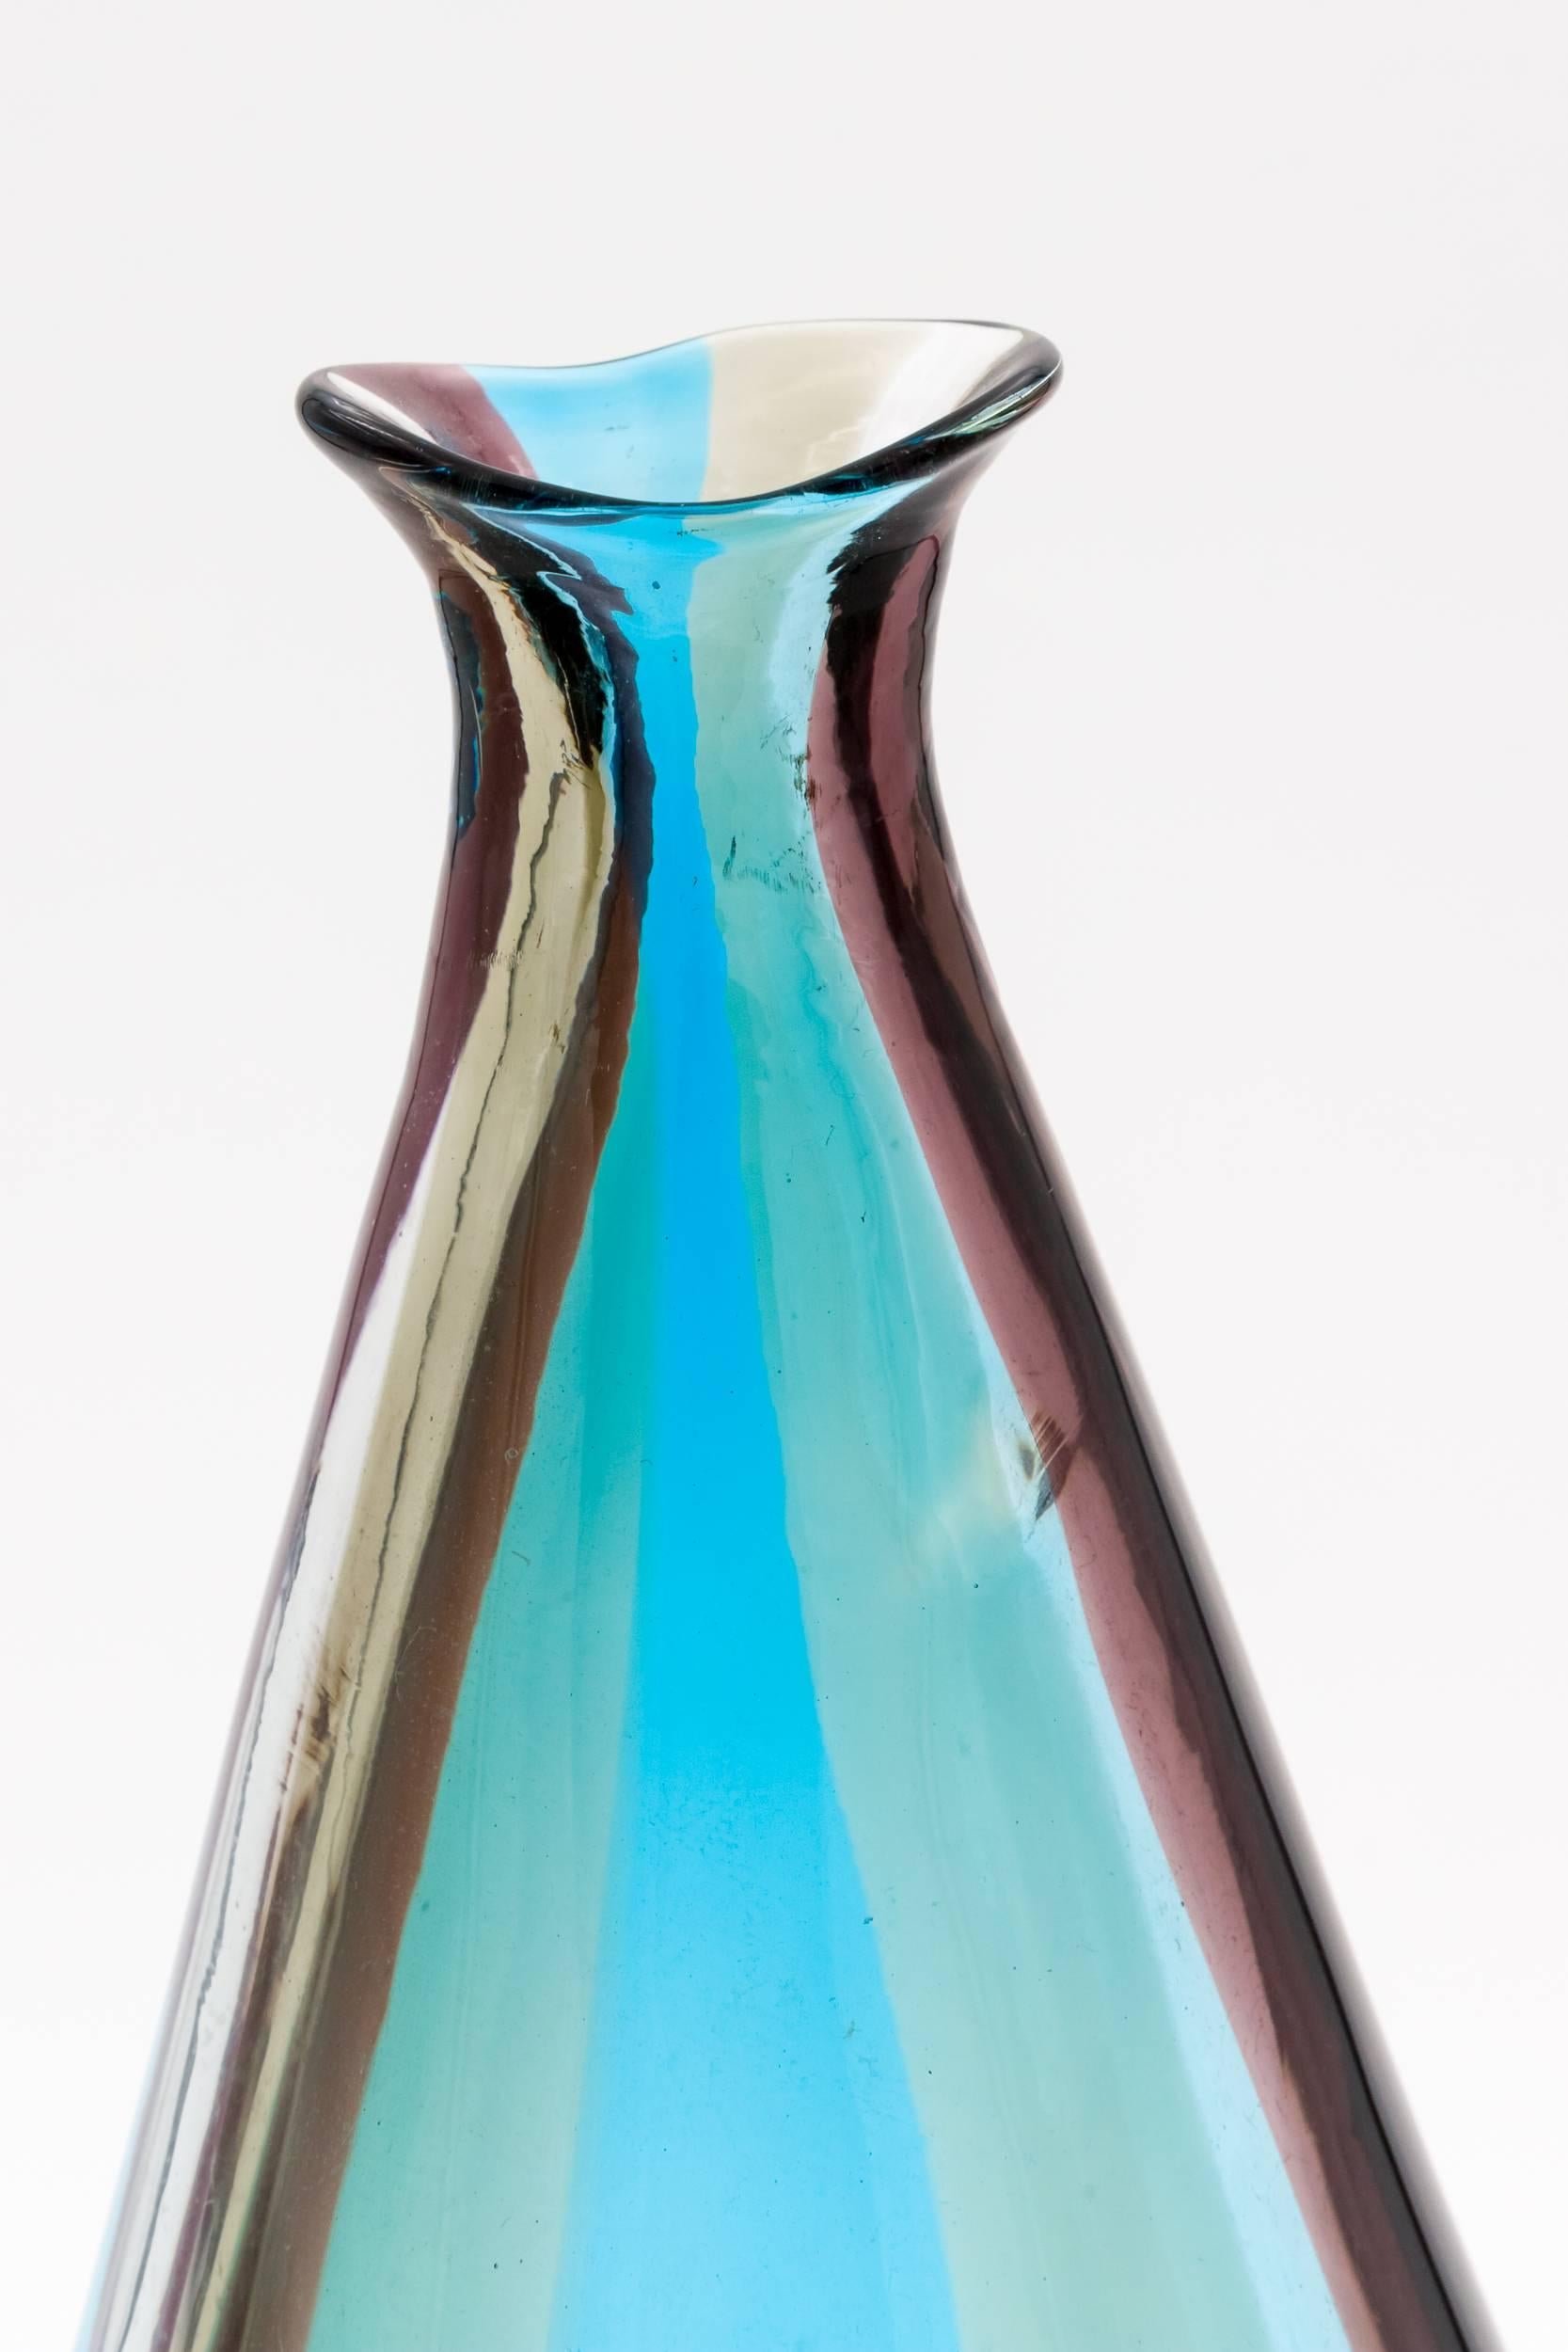 A large vase with an elongated neck of the spicchi serie with wide vertical wine-colored, cyclamen and acquamarine bands known as model 4891 designed 1953-1957.

This model was designed by Fulvio Bianconi when he was artistic director of Venini